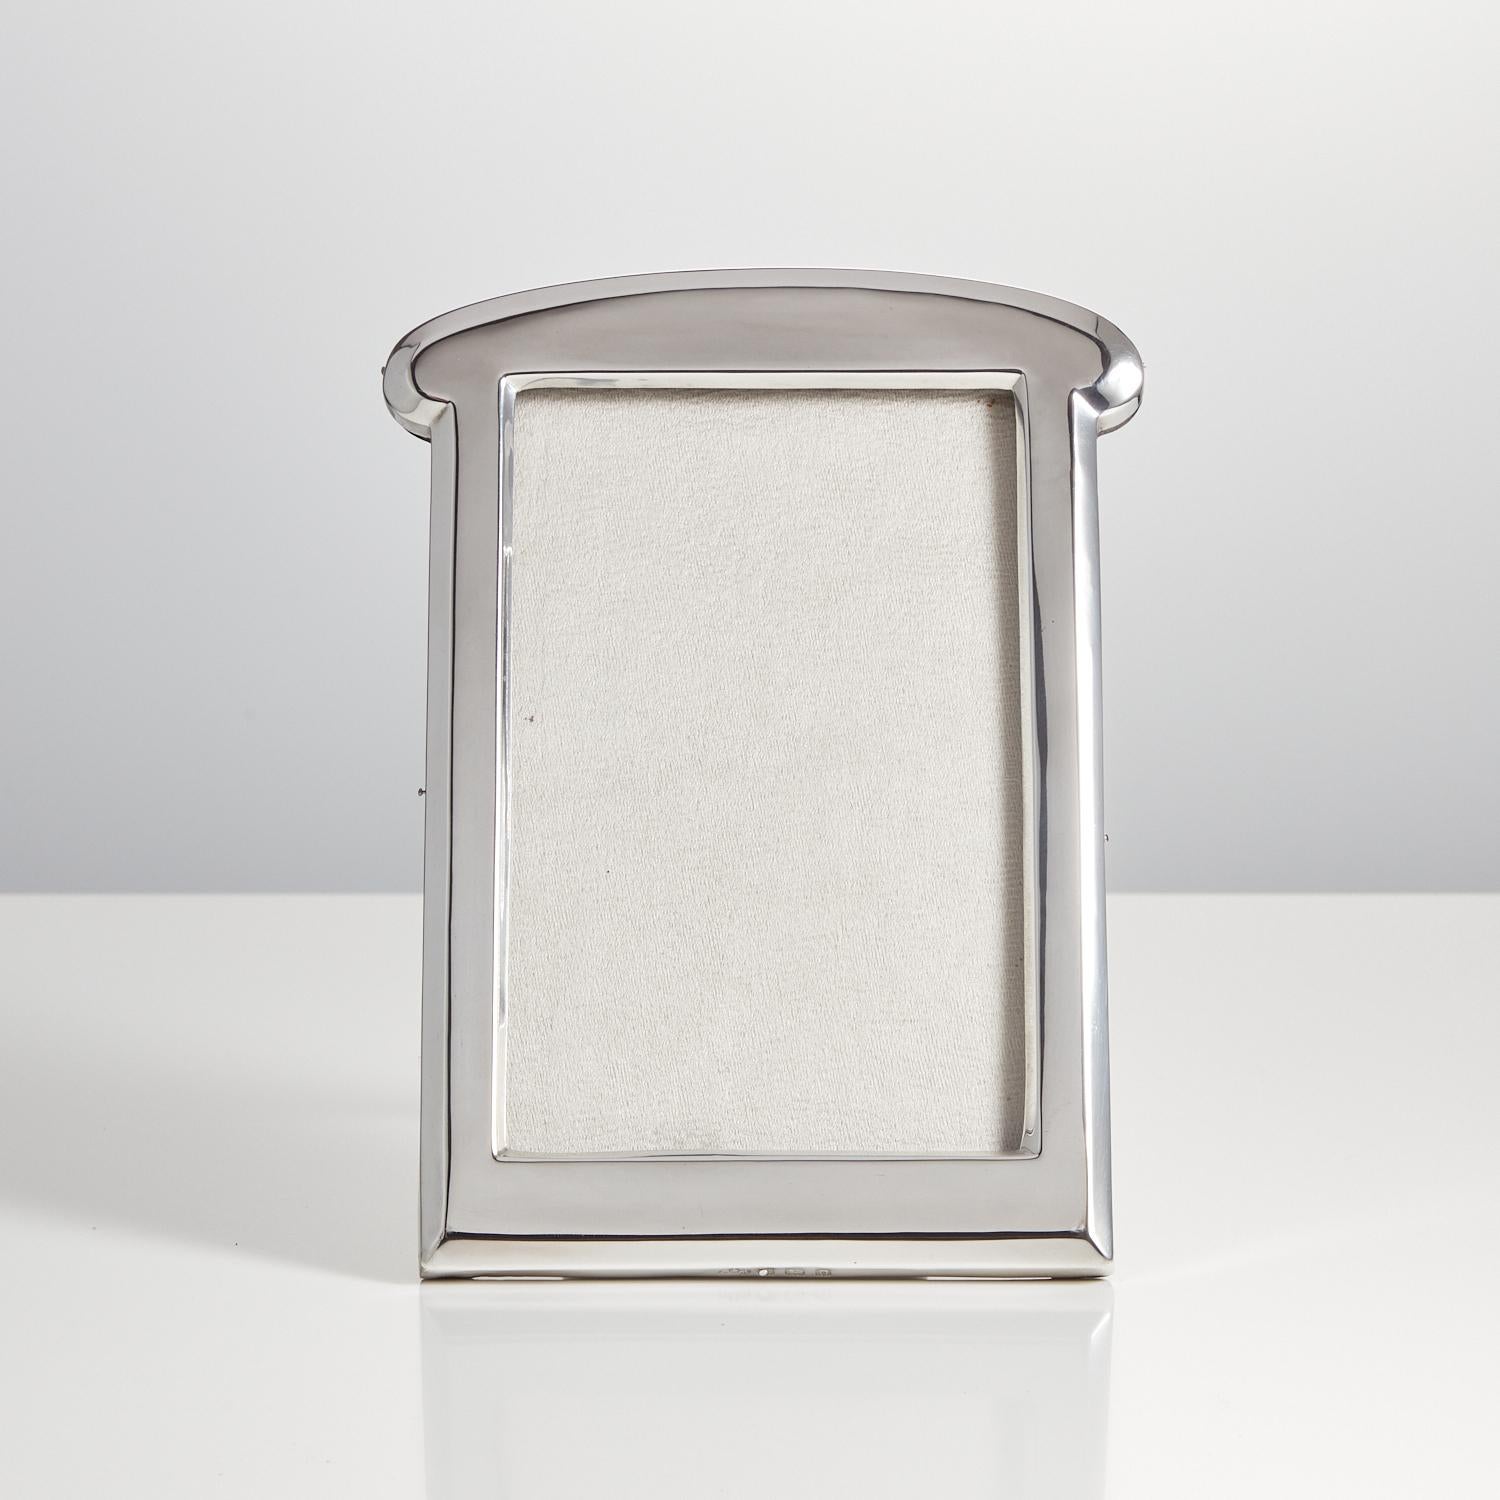 A wonderful 20th Century Art Deco English Sterling Silver Picture frame, Date Birmingham 1939 Maker Elkington & Co.

A 20th century Art Deco photograph frame, both the silver and the back are in very good condition.
The frame would make a great gift